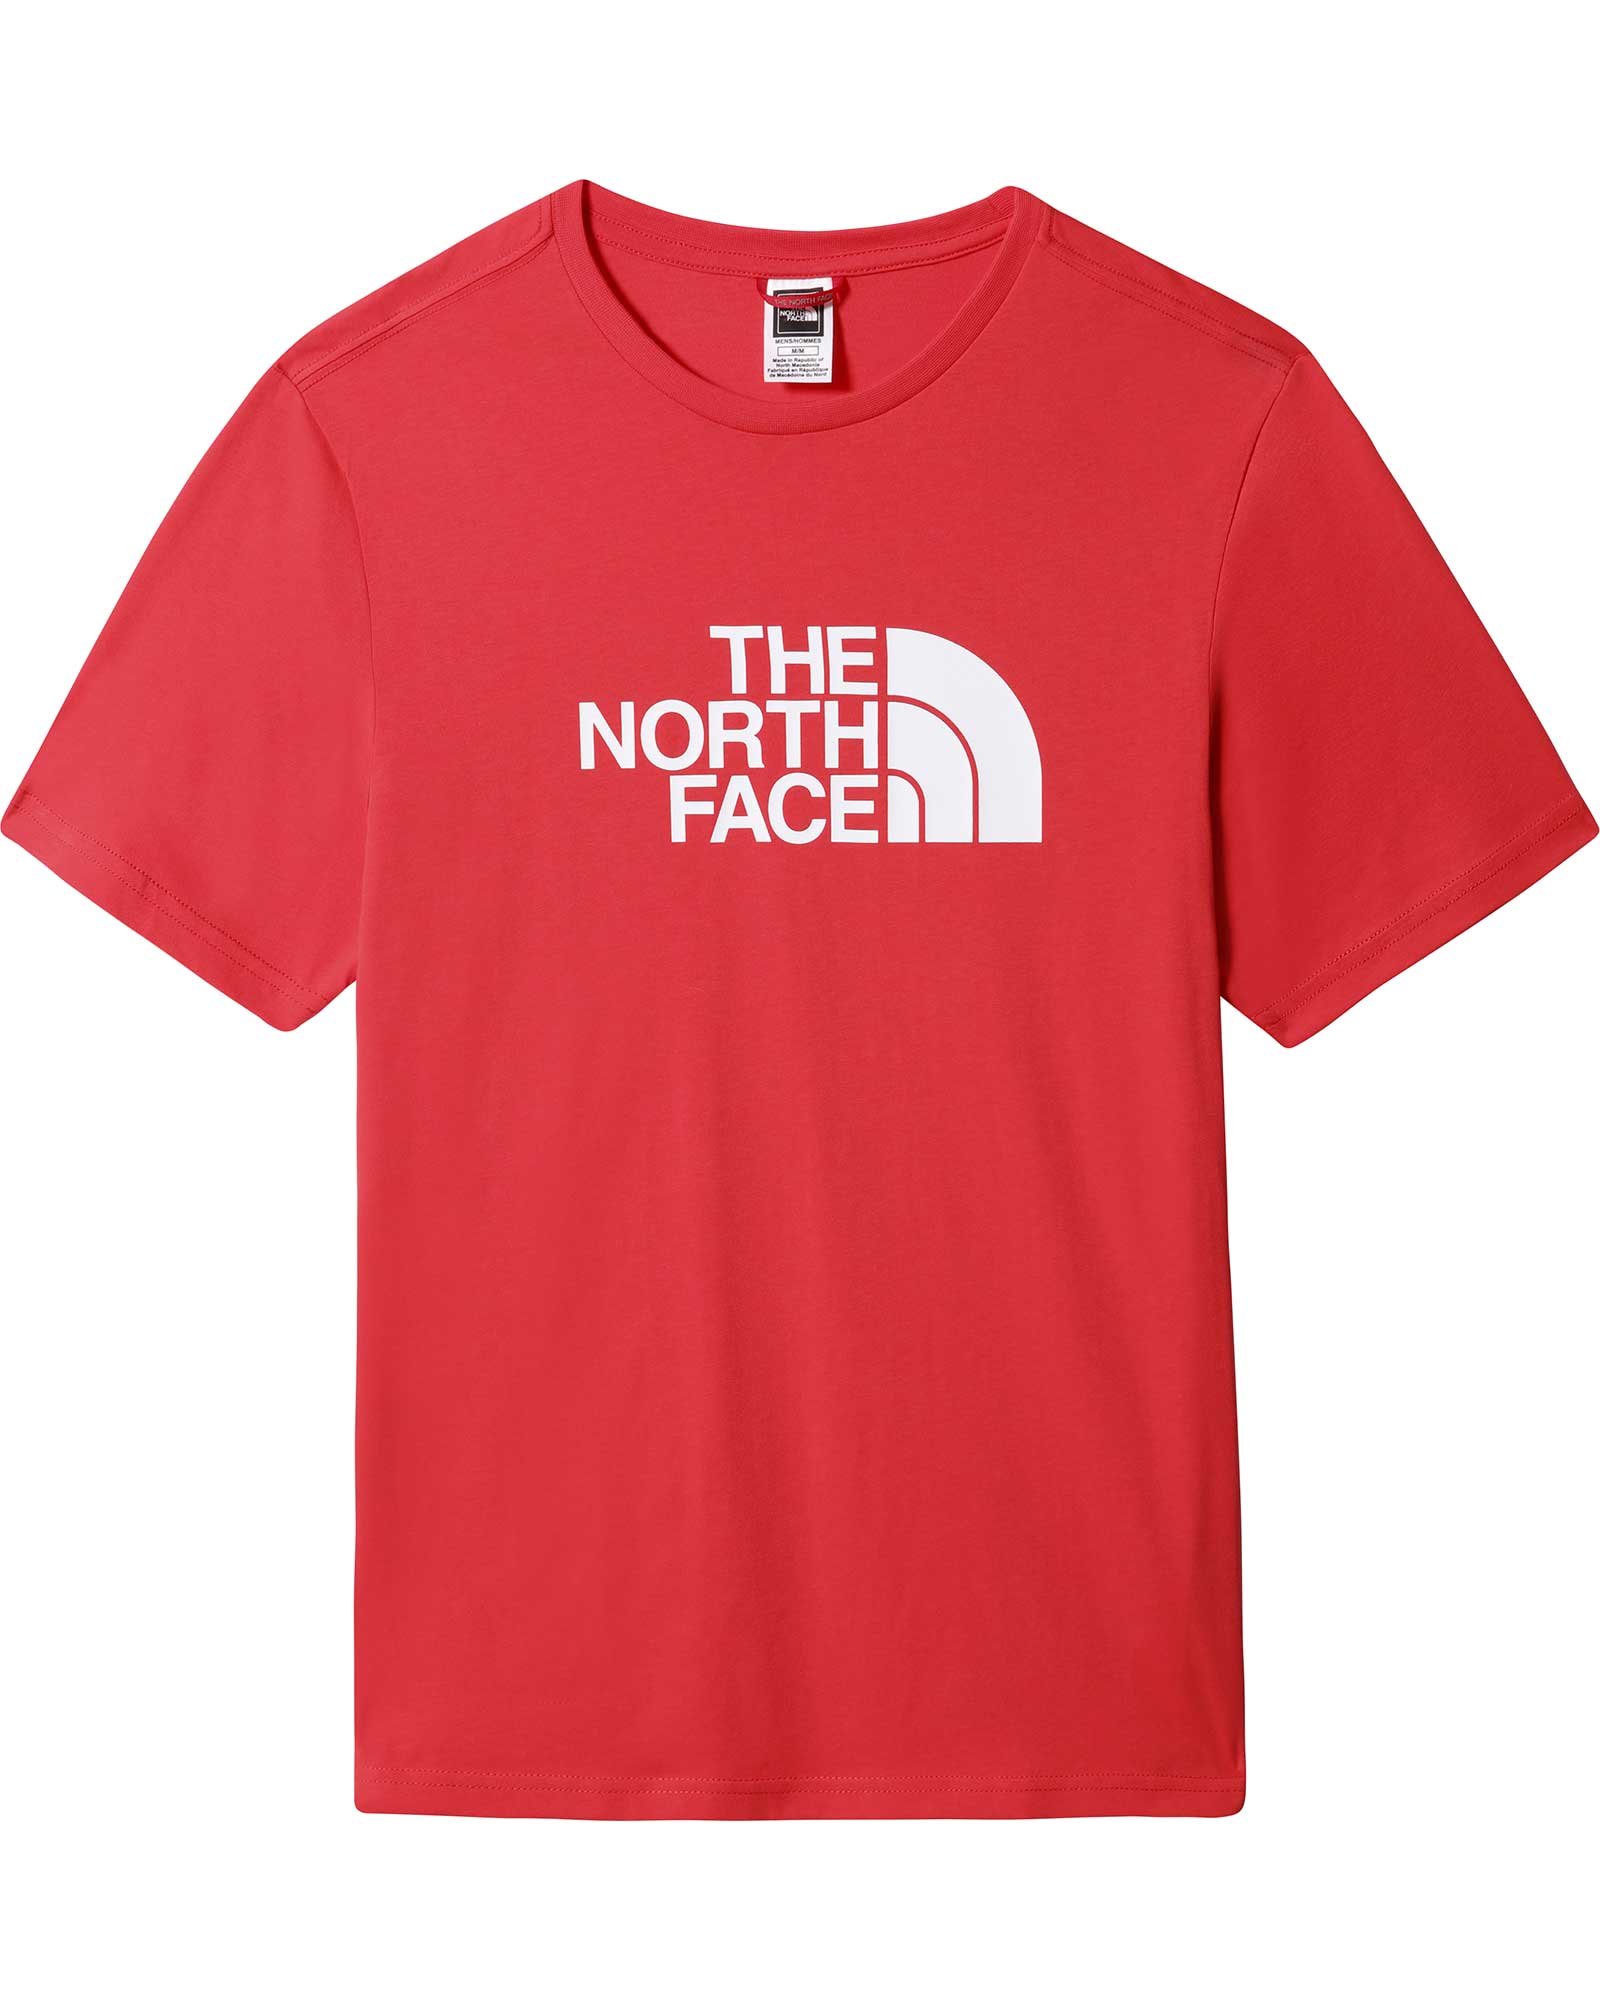 The North Face Easy Men’s T Shirt - Horizon Red XL